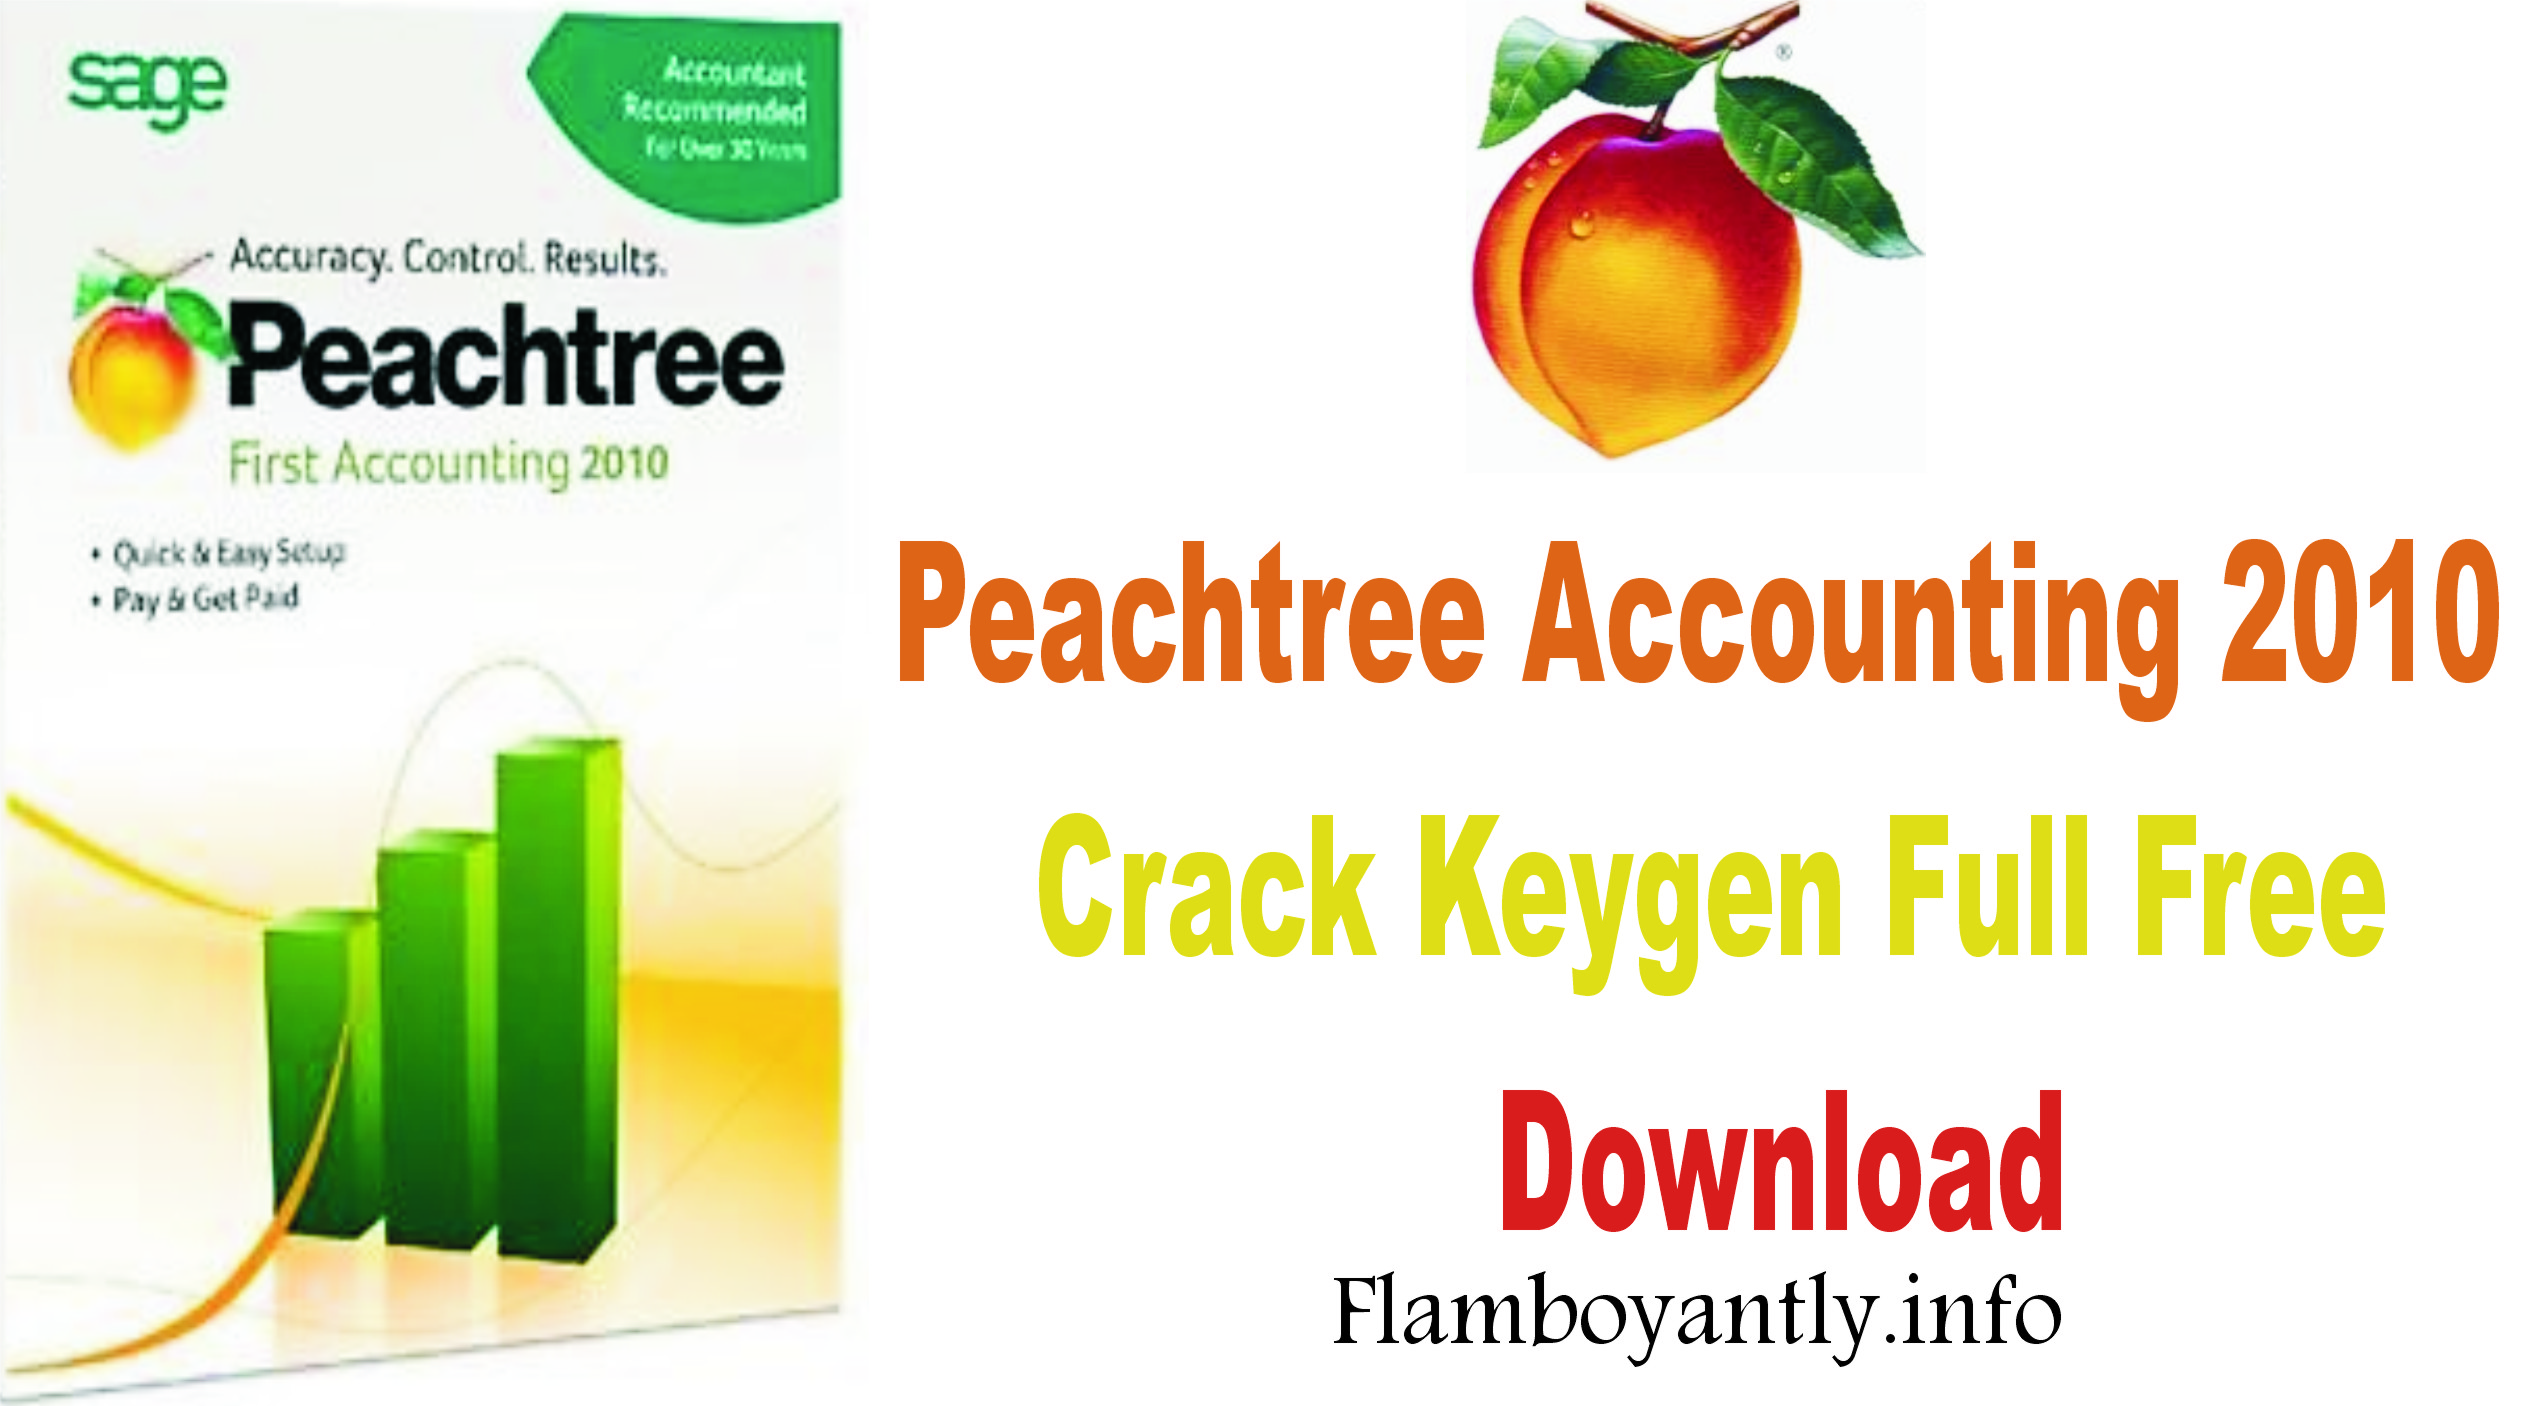 peachtree accounting software free download windows 10